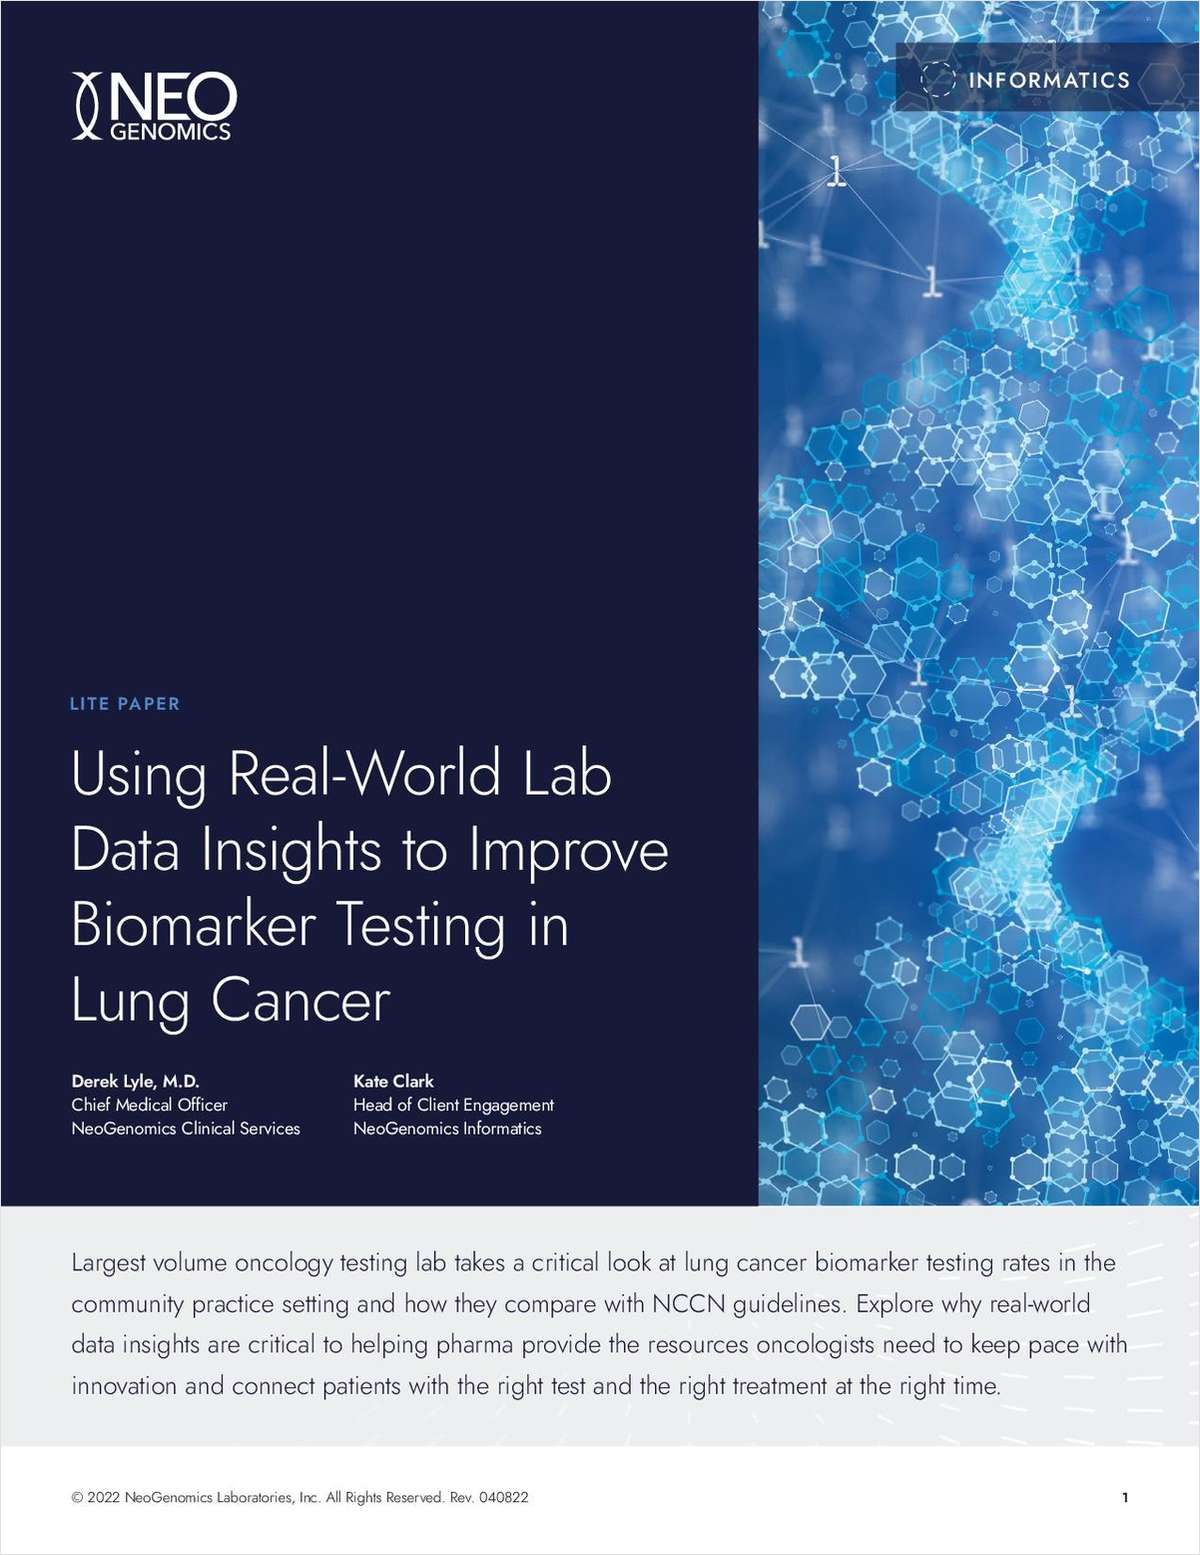 Using Real-World Lab Data Insights to Improve Biomarker Testing in Lung Cancer